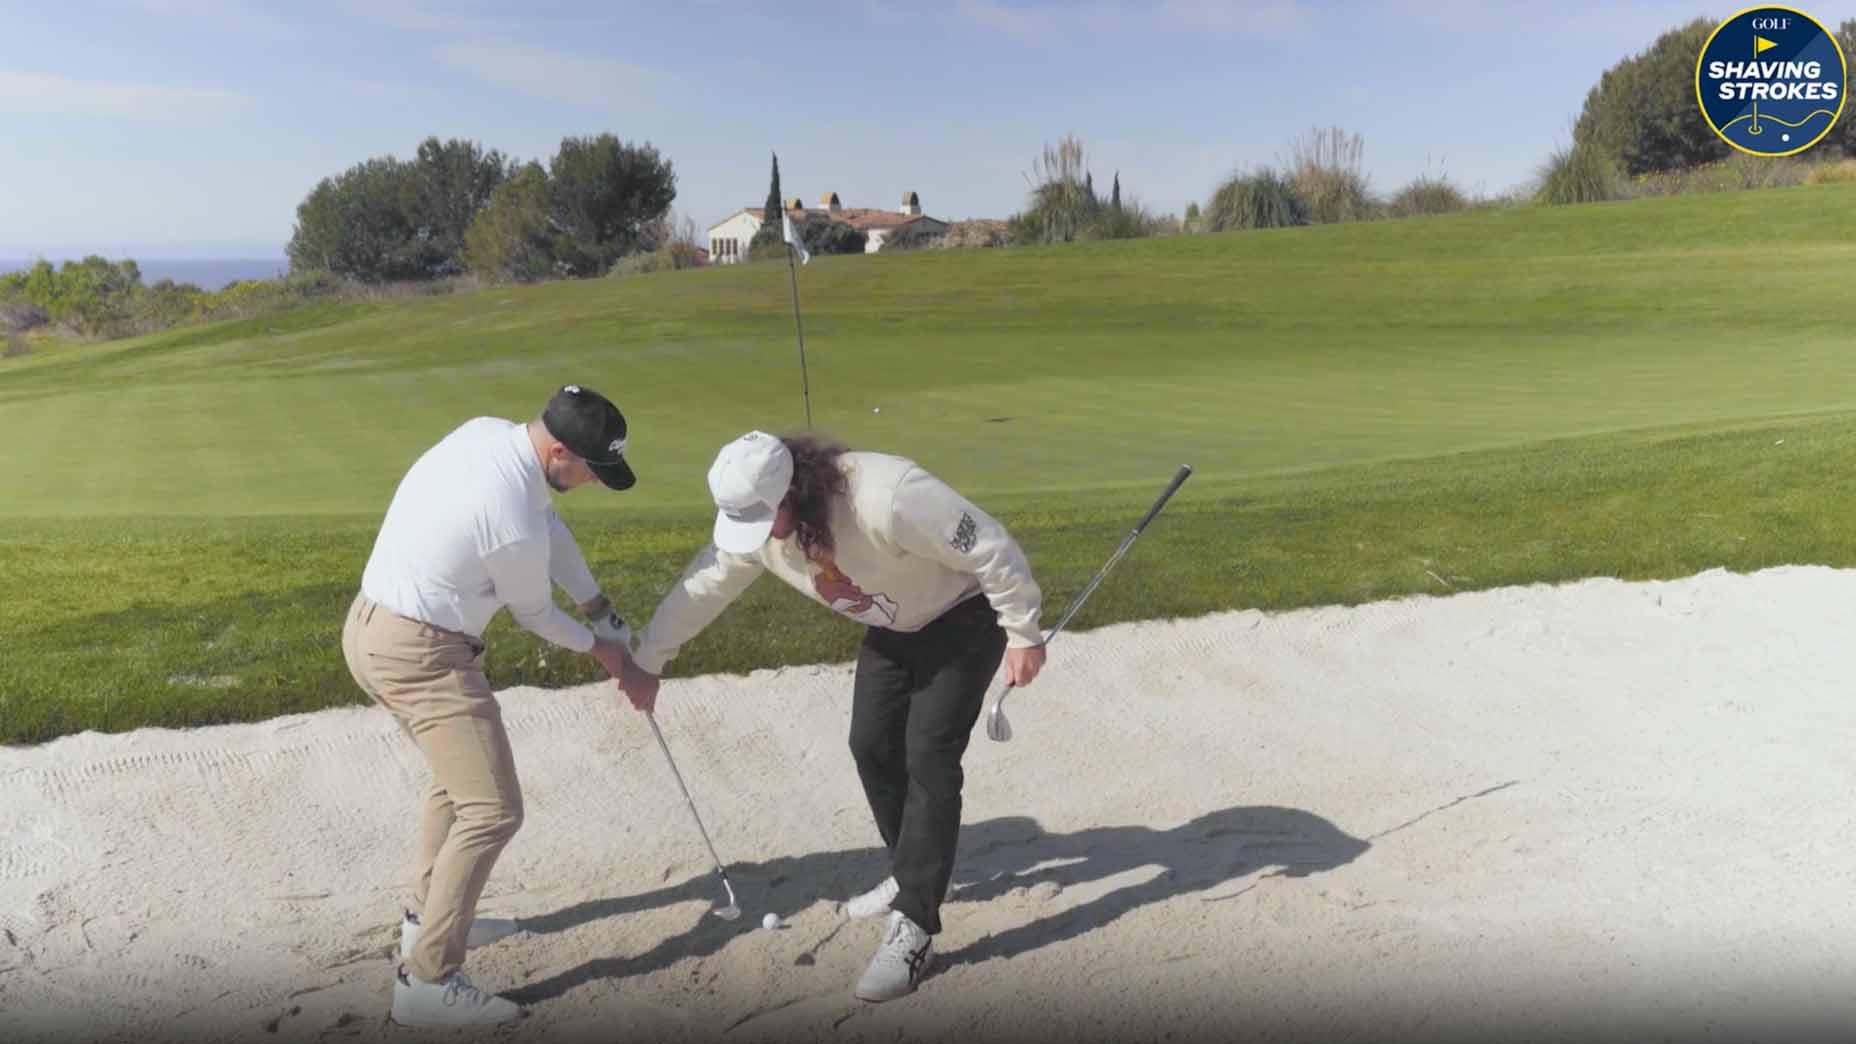 If you're struggling with mishits from greenside bunkers, Cleveland Golf ambassador Jake Hutt shares some tips to see improvement